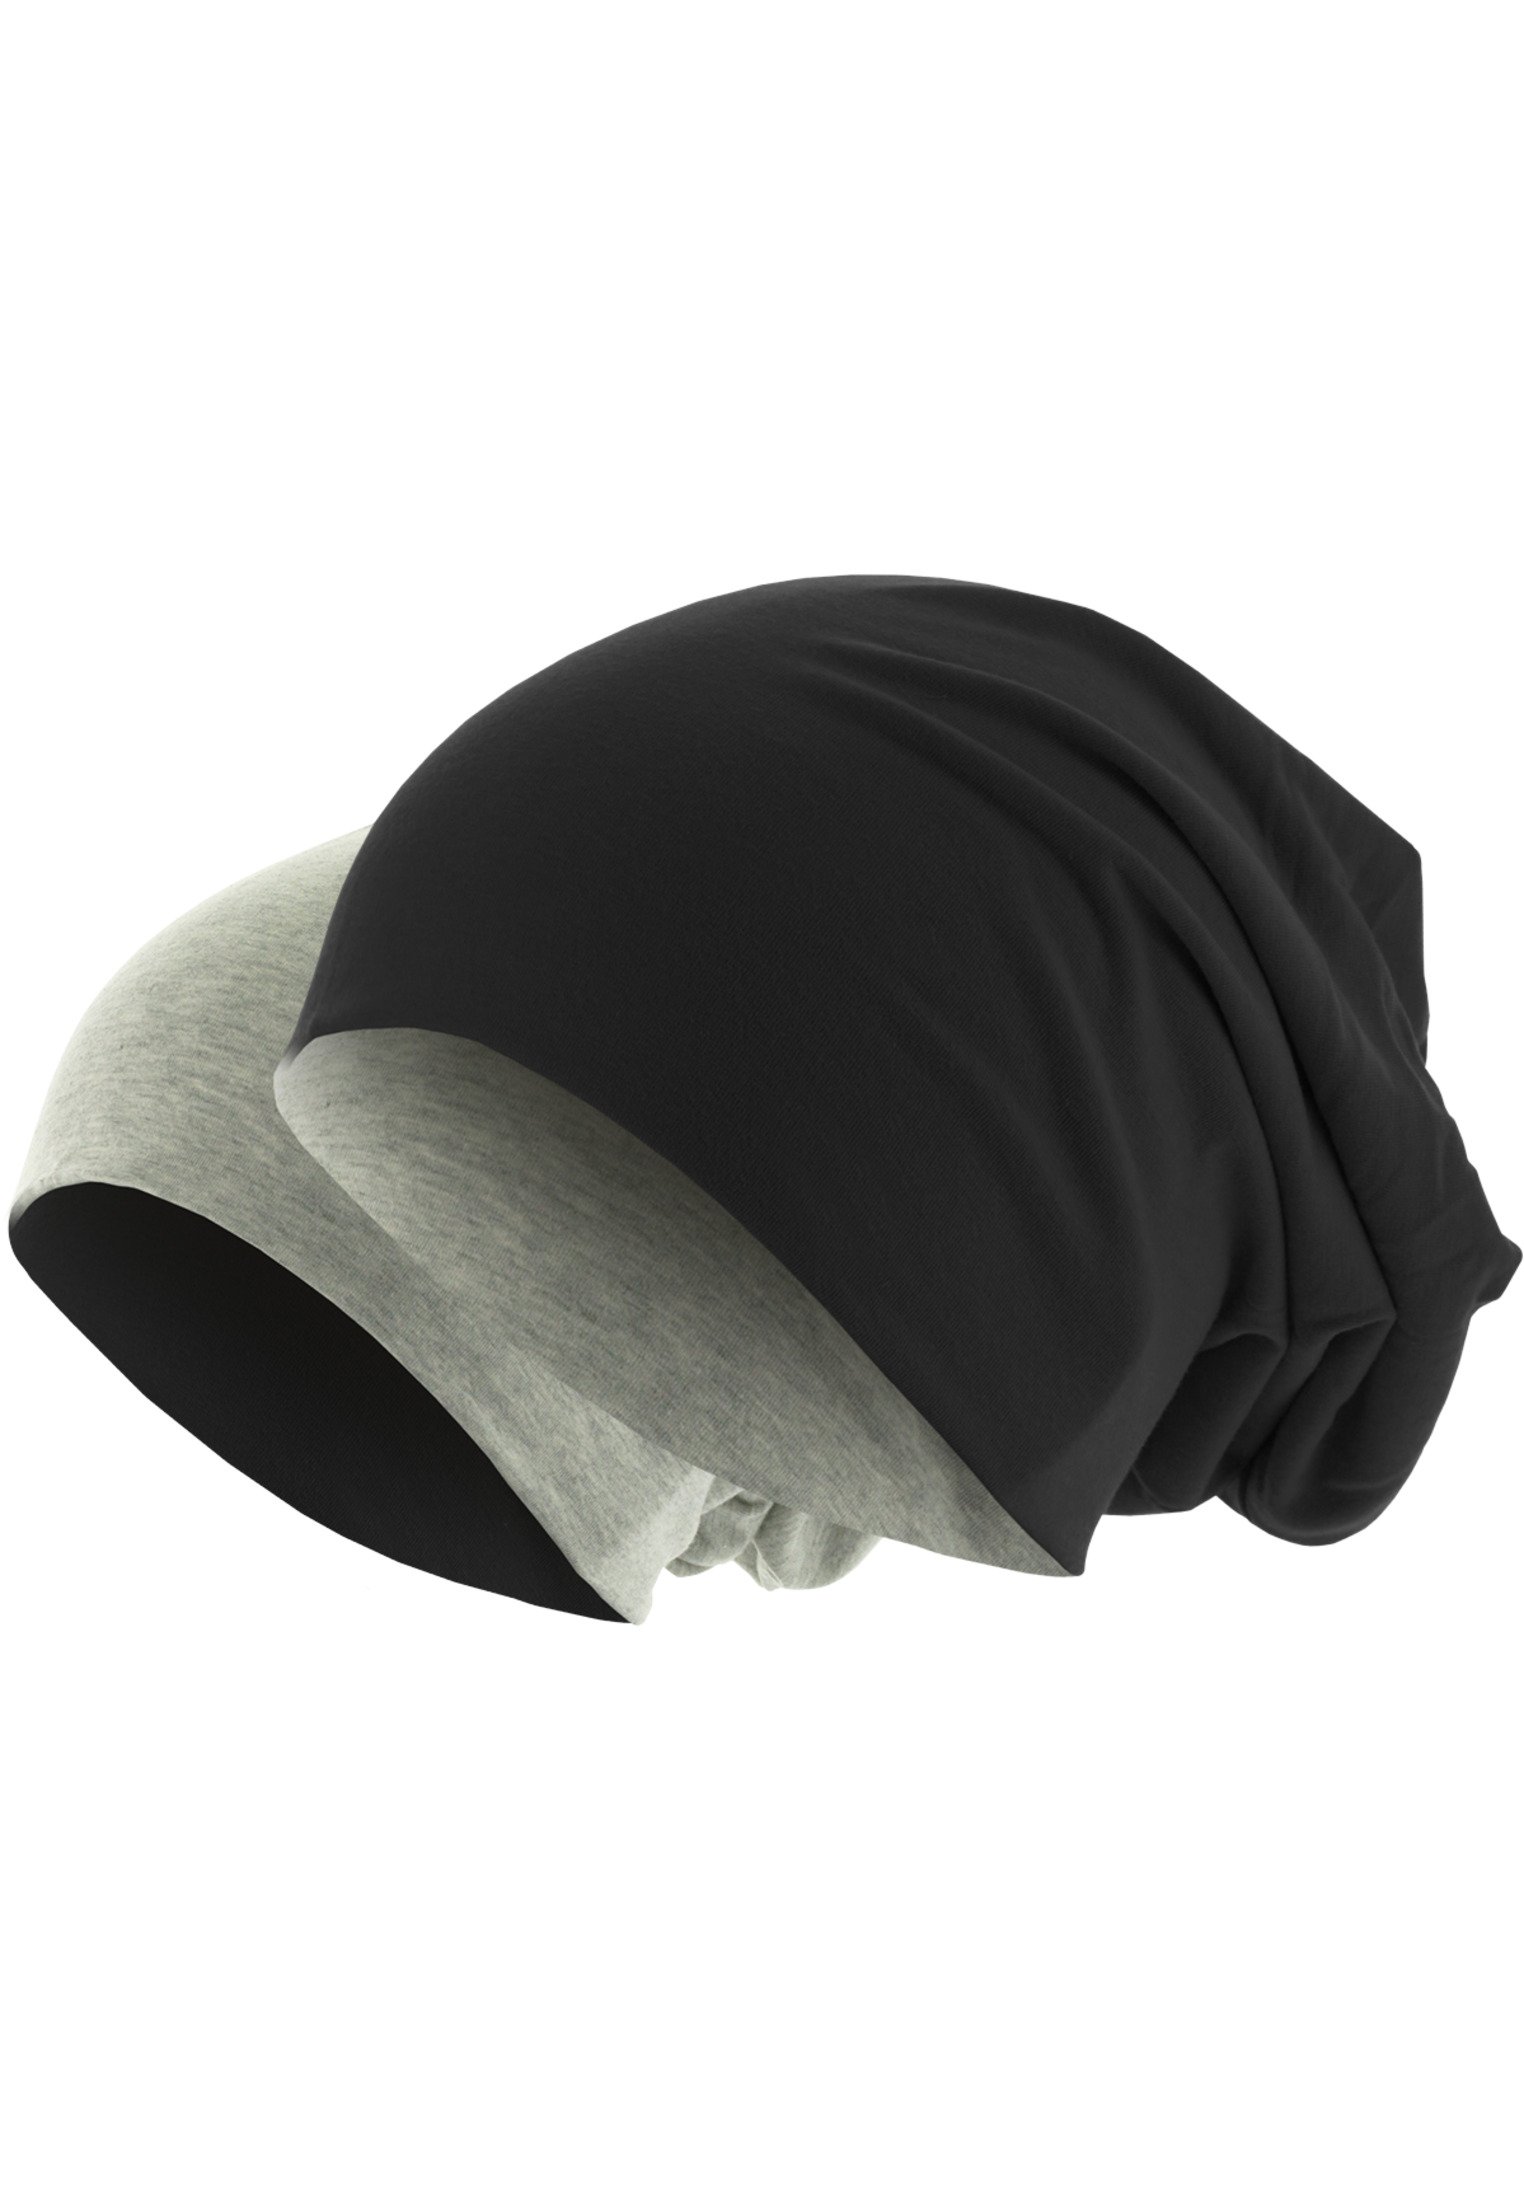 Jersey Beanie reversible blk/gry one size